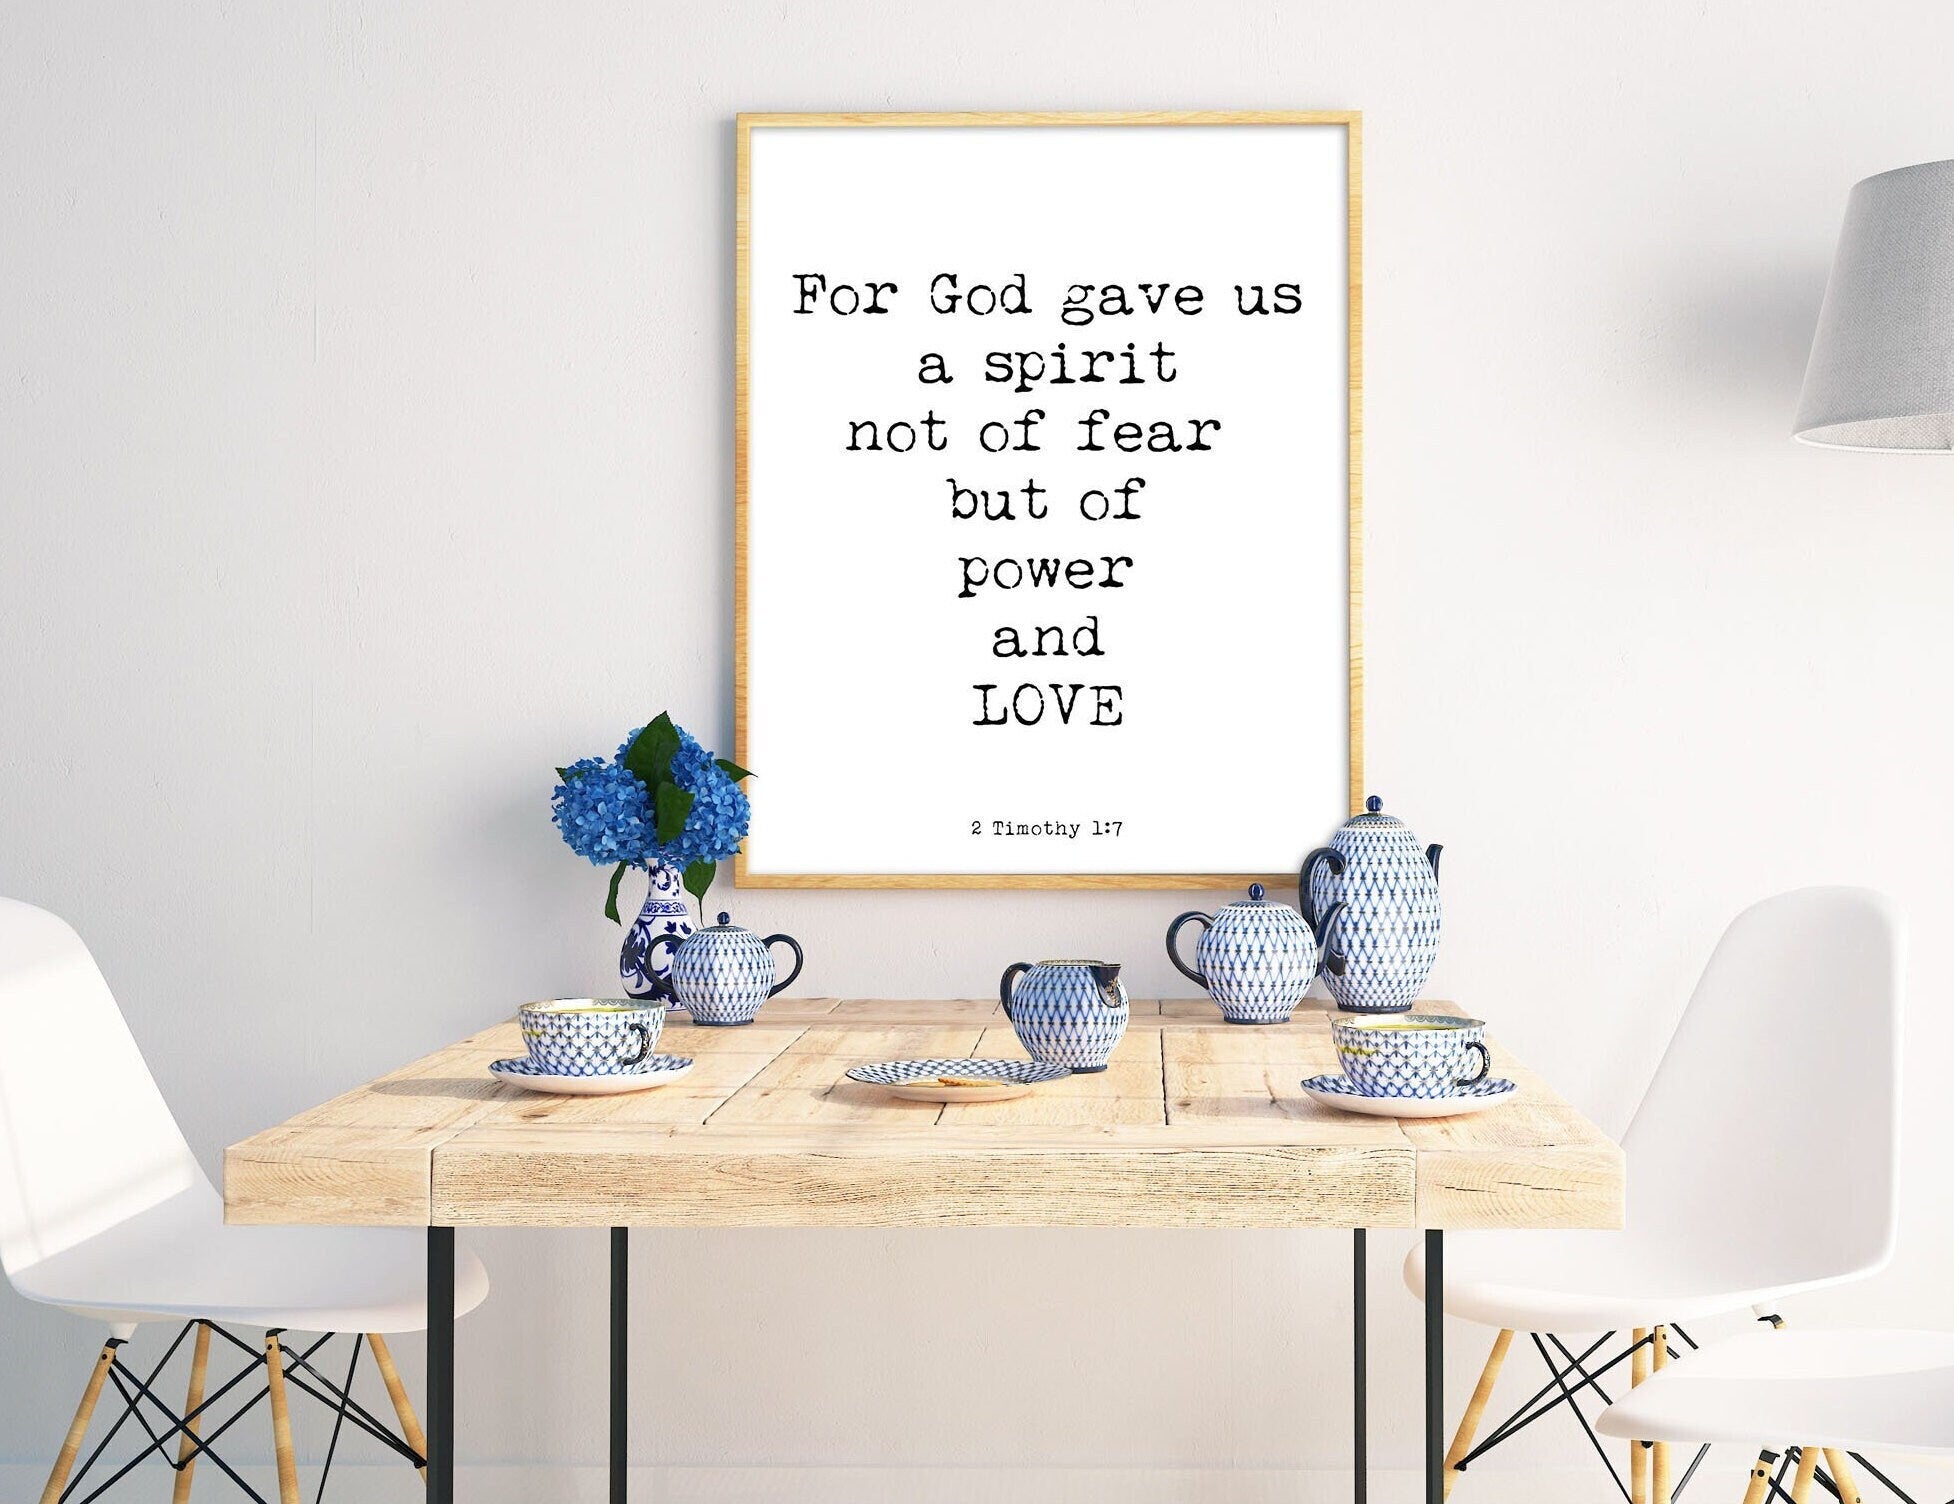 Christian Wall Art Bible Verse 2 Timothy 1:7 Quote Print, Spirit of Power and Love Wall Art in Black & White